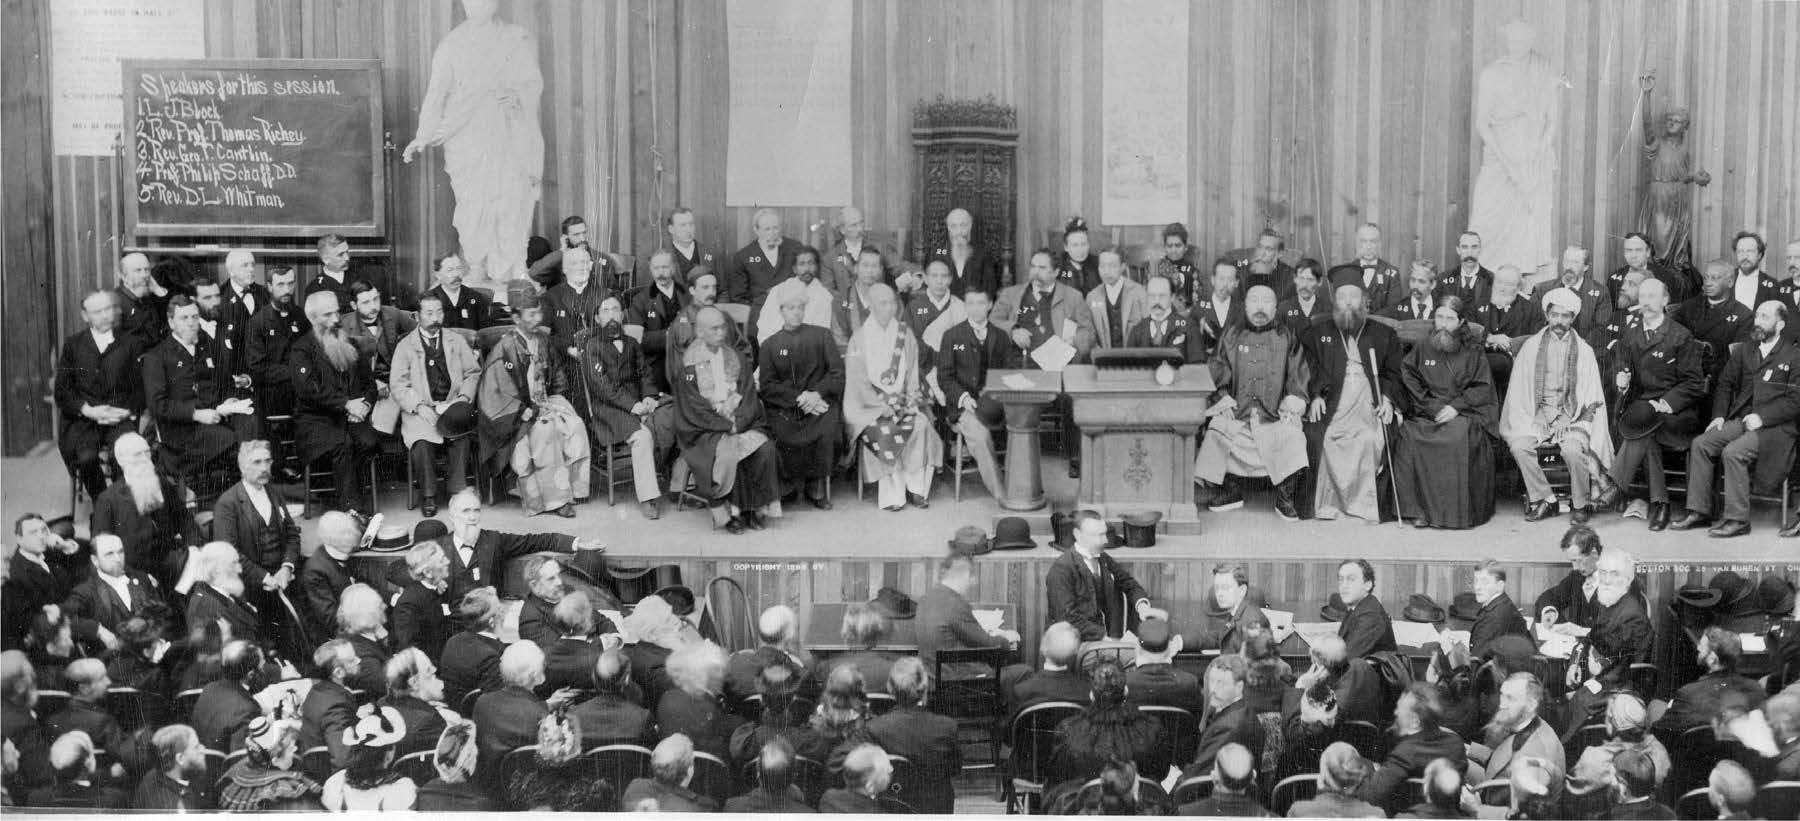 In 1893 the Parliament of World Religions refused to allow a Latter-day Saint delegate, highlighting the struggle of the church to gain acceptance. Photo of the convened parliament at the 1893 World’s Columbian Exposition courtesy of the Council for a Parliament of the World’s Religions.